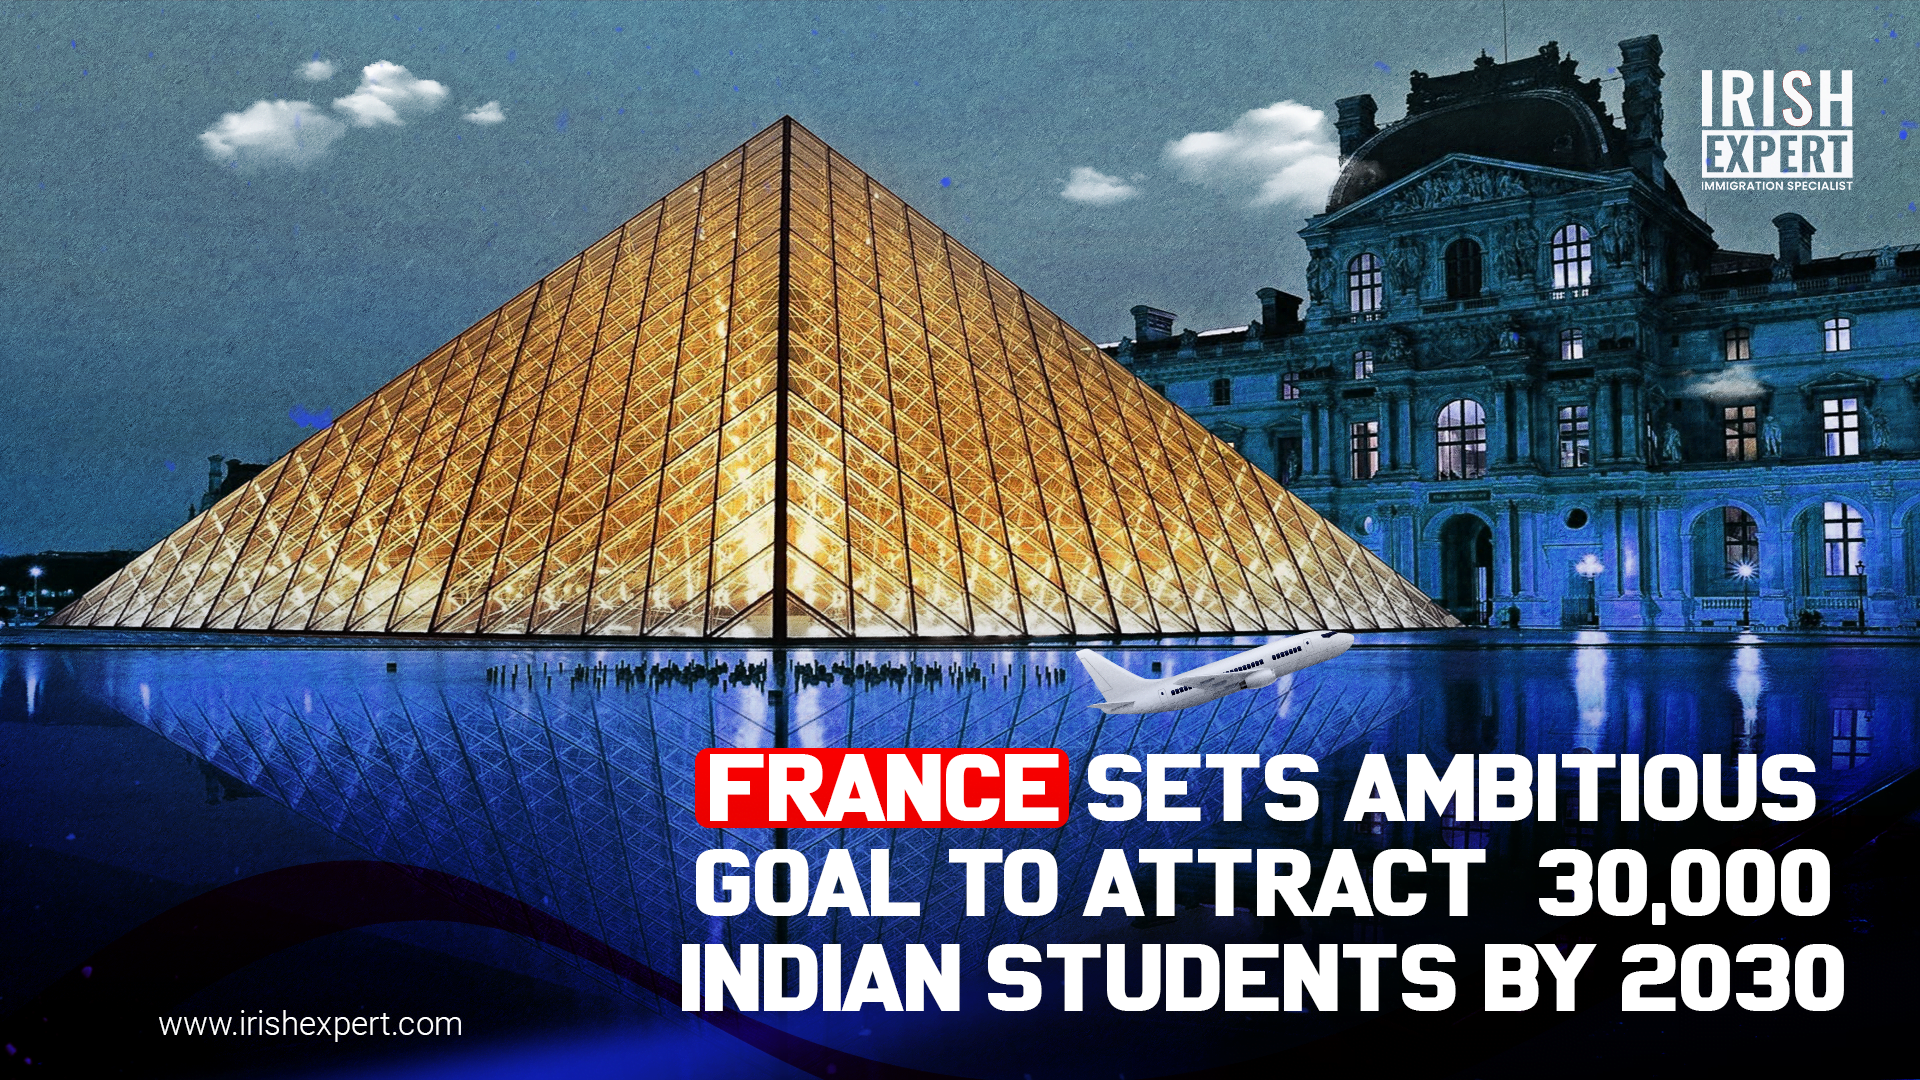 France Sets Ambitious Goal to Attract 30,000 Indian Students by 2030